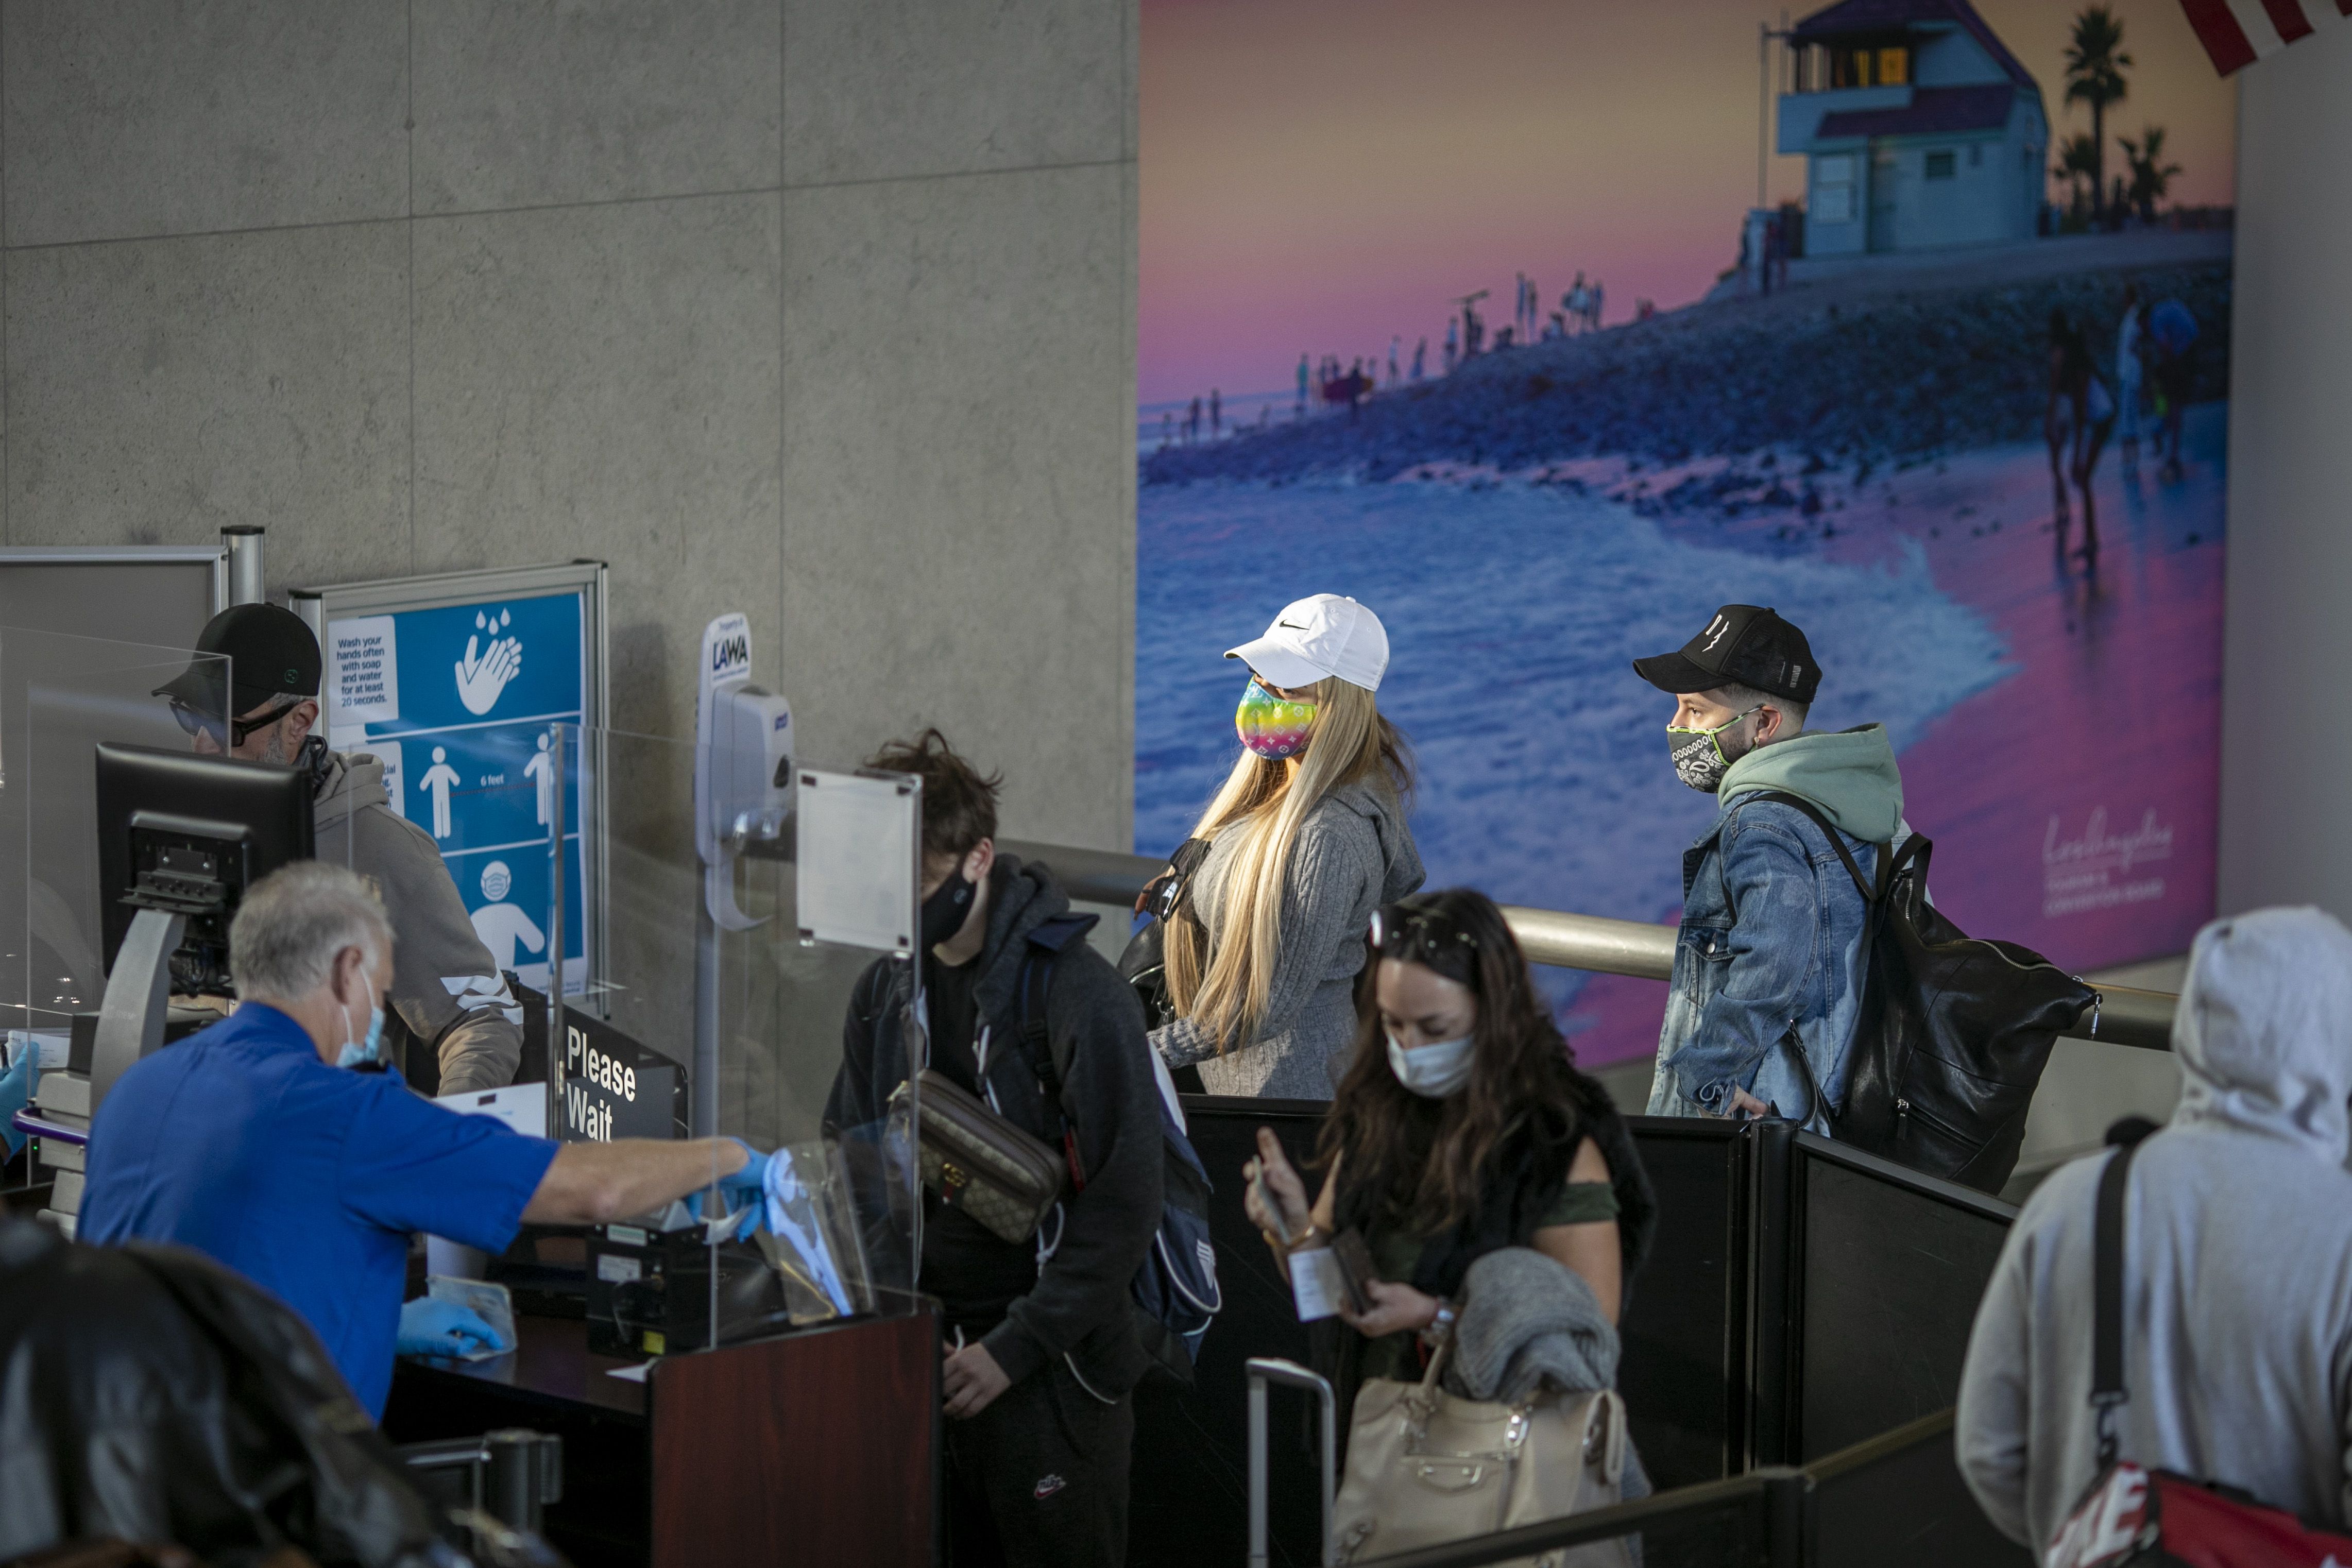 A group of people wearing face masks, three with baseball caps, stand in line while wearing face masks 